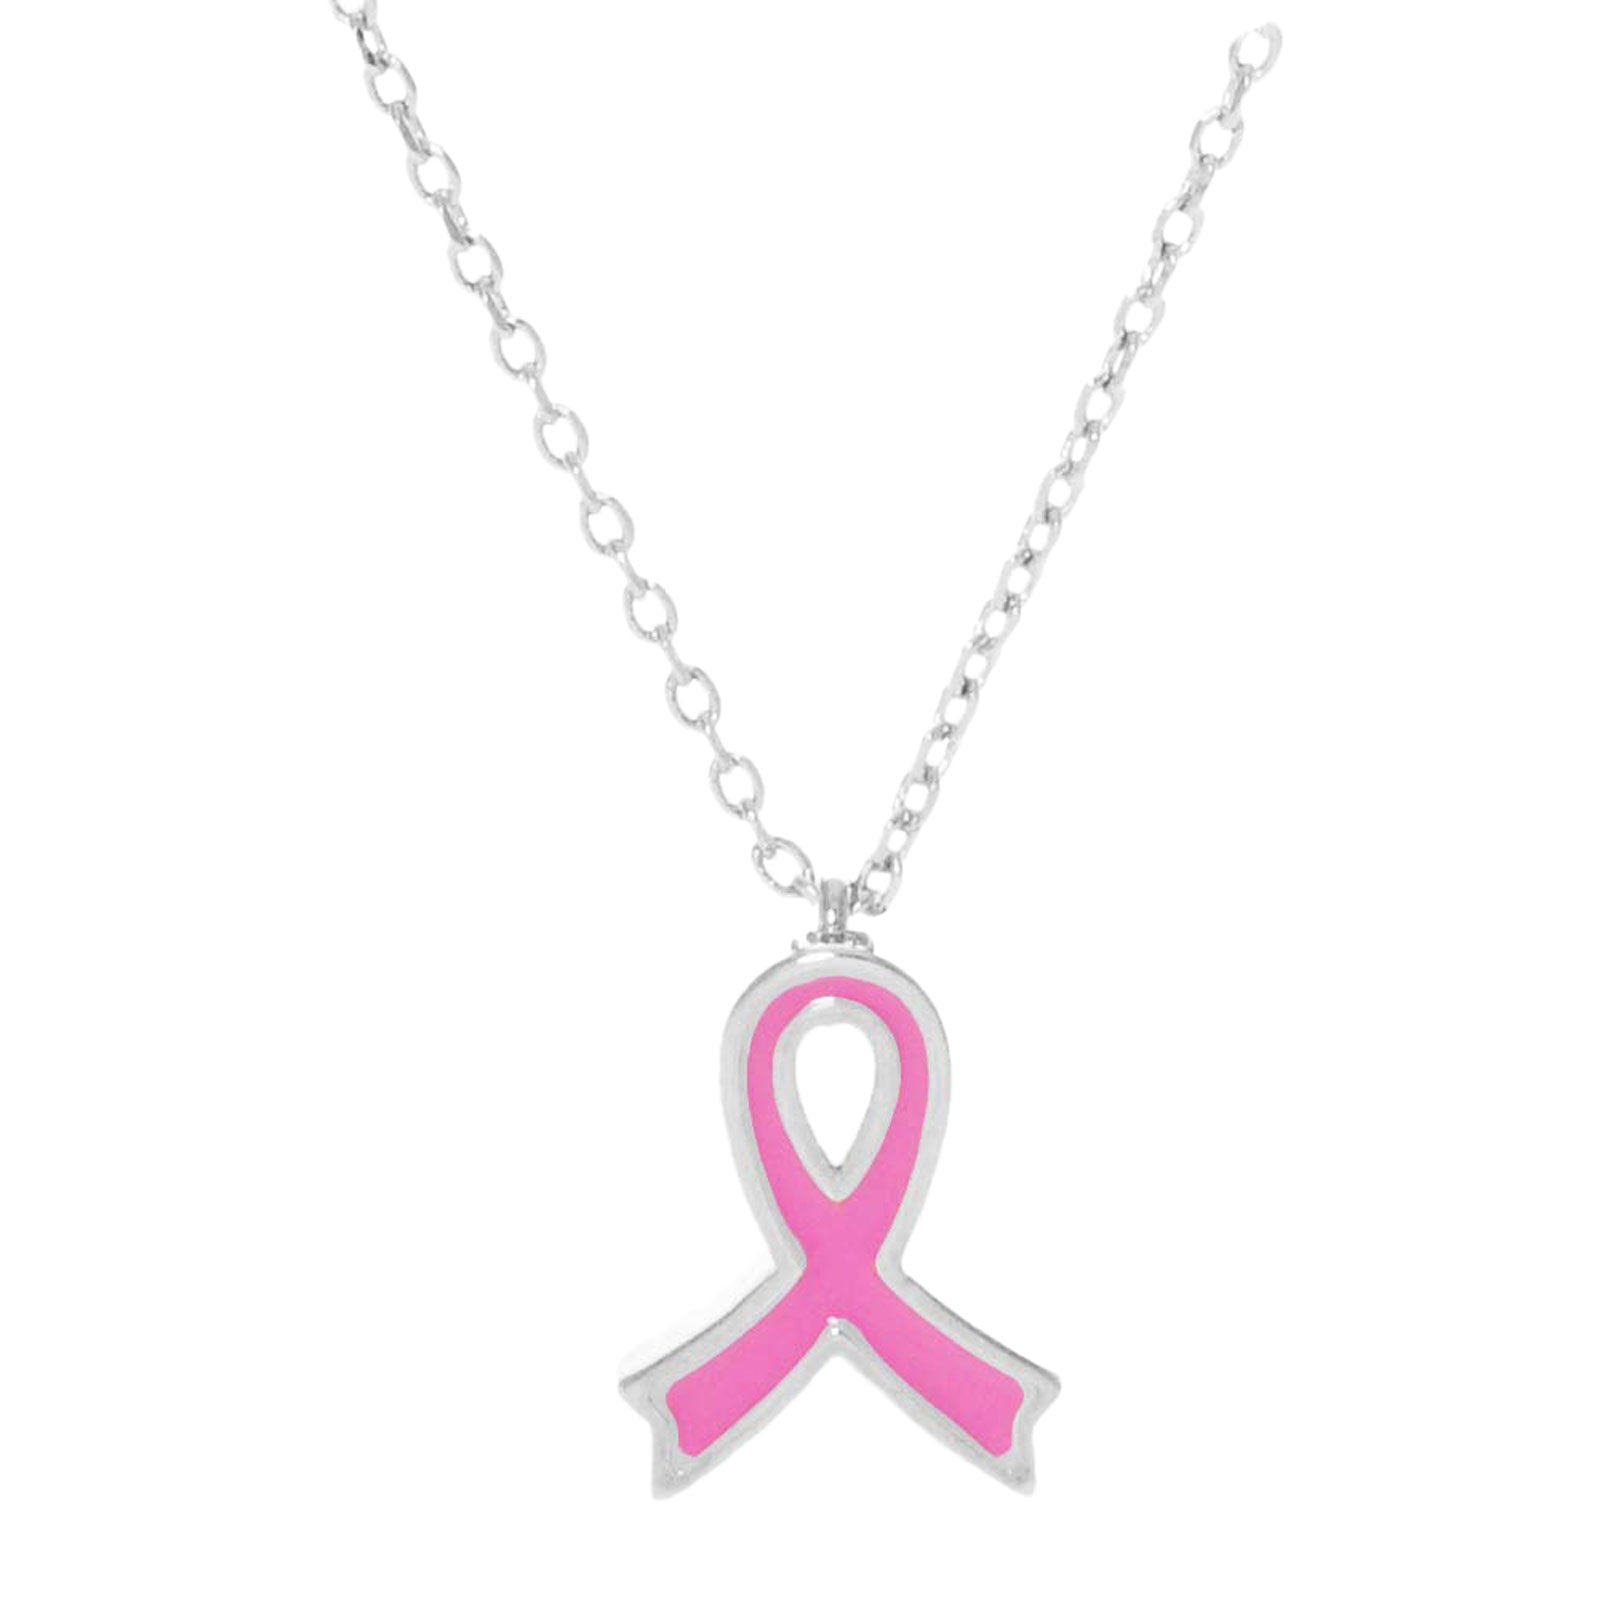 Trendy Gold Dipped Enamel Pink Ribbon Pendant Necklace. Beautifully crafted design adds a gorgeous glow to any outfit. Jewelry that fits your lifestyle! Perfect Birthday Gift, Anniversary Gift, Mother's Day Gift, Anniversary Gift, Graduation Gift, Prom Jewelry, Just Because Gift, Thank you Gift.